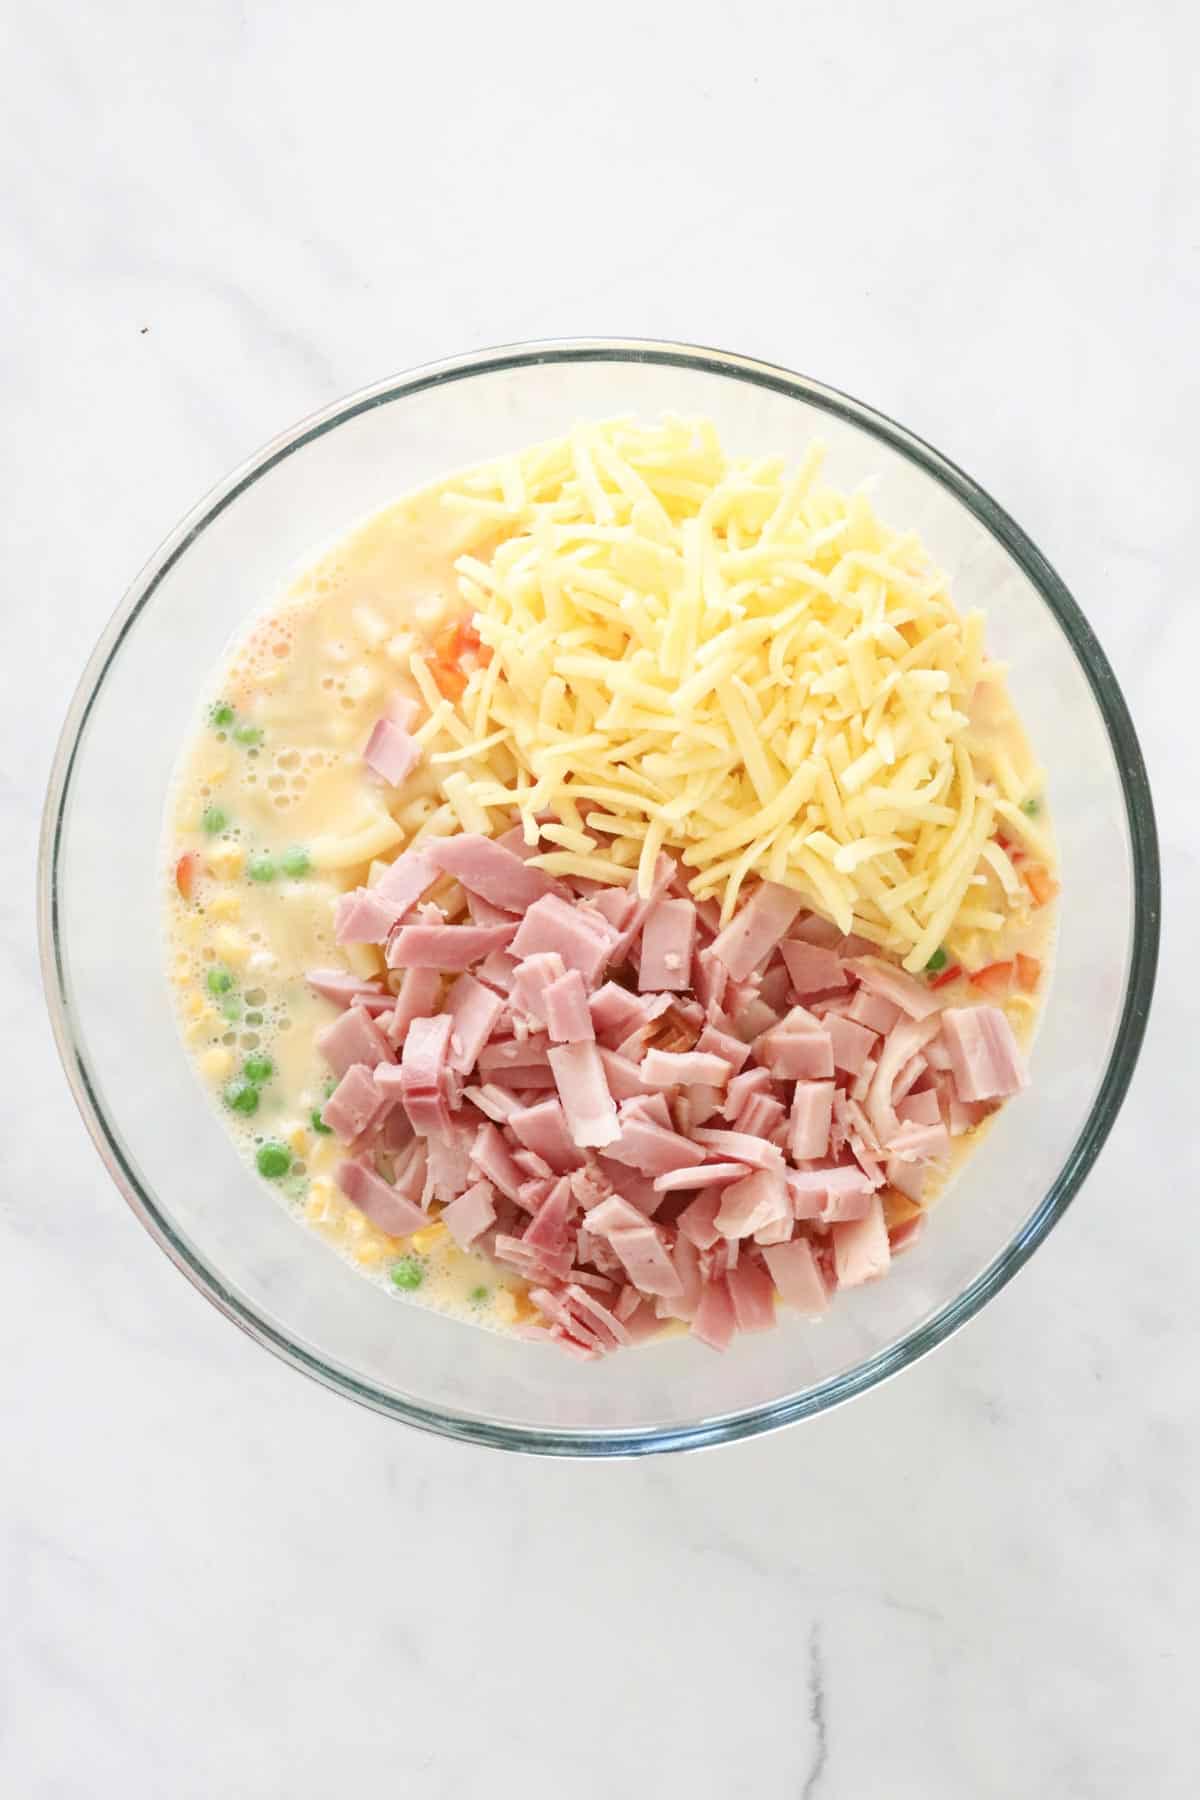 The vegetables, chopped ham and cheese added to the beaten eggs.